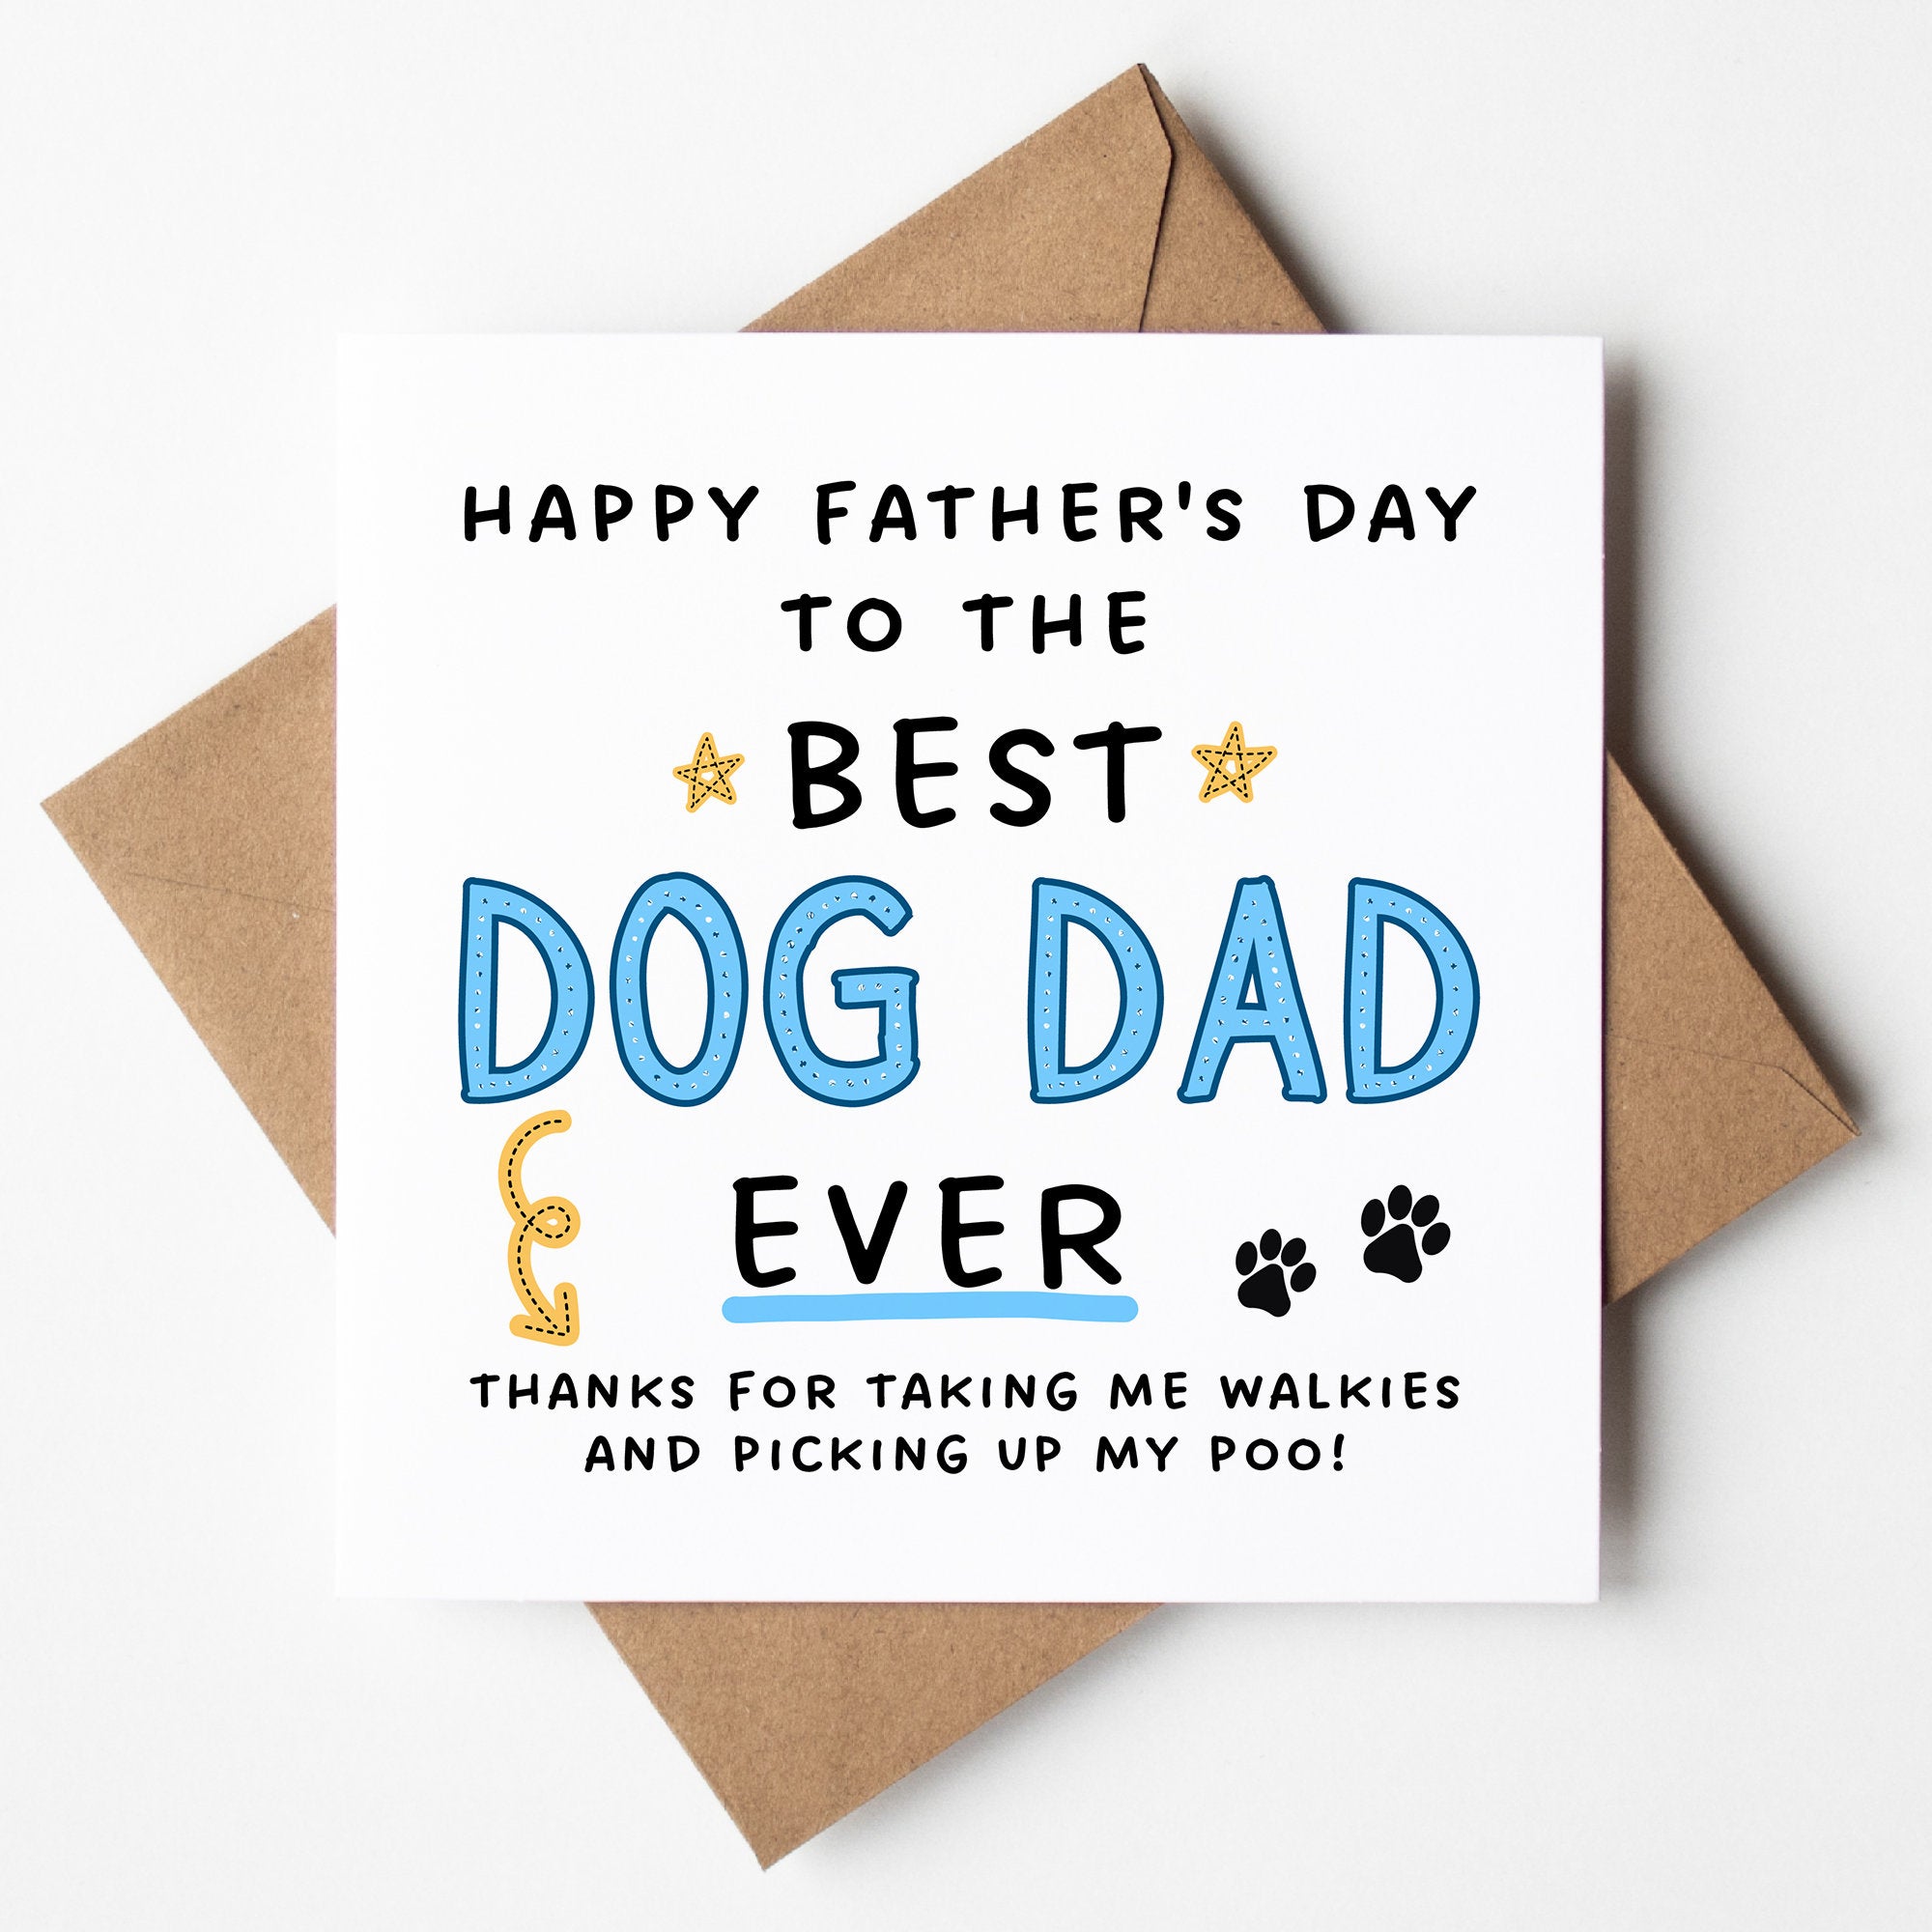 Fathers Day Card From The Dog - Best Dog Dad Ever